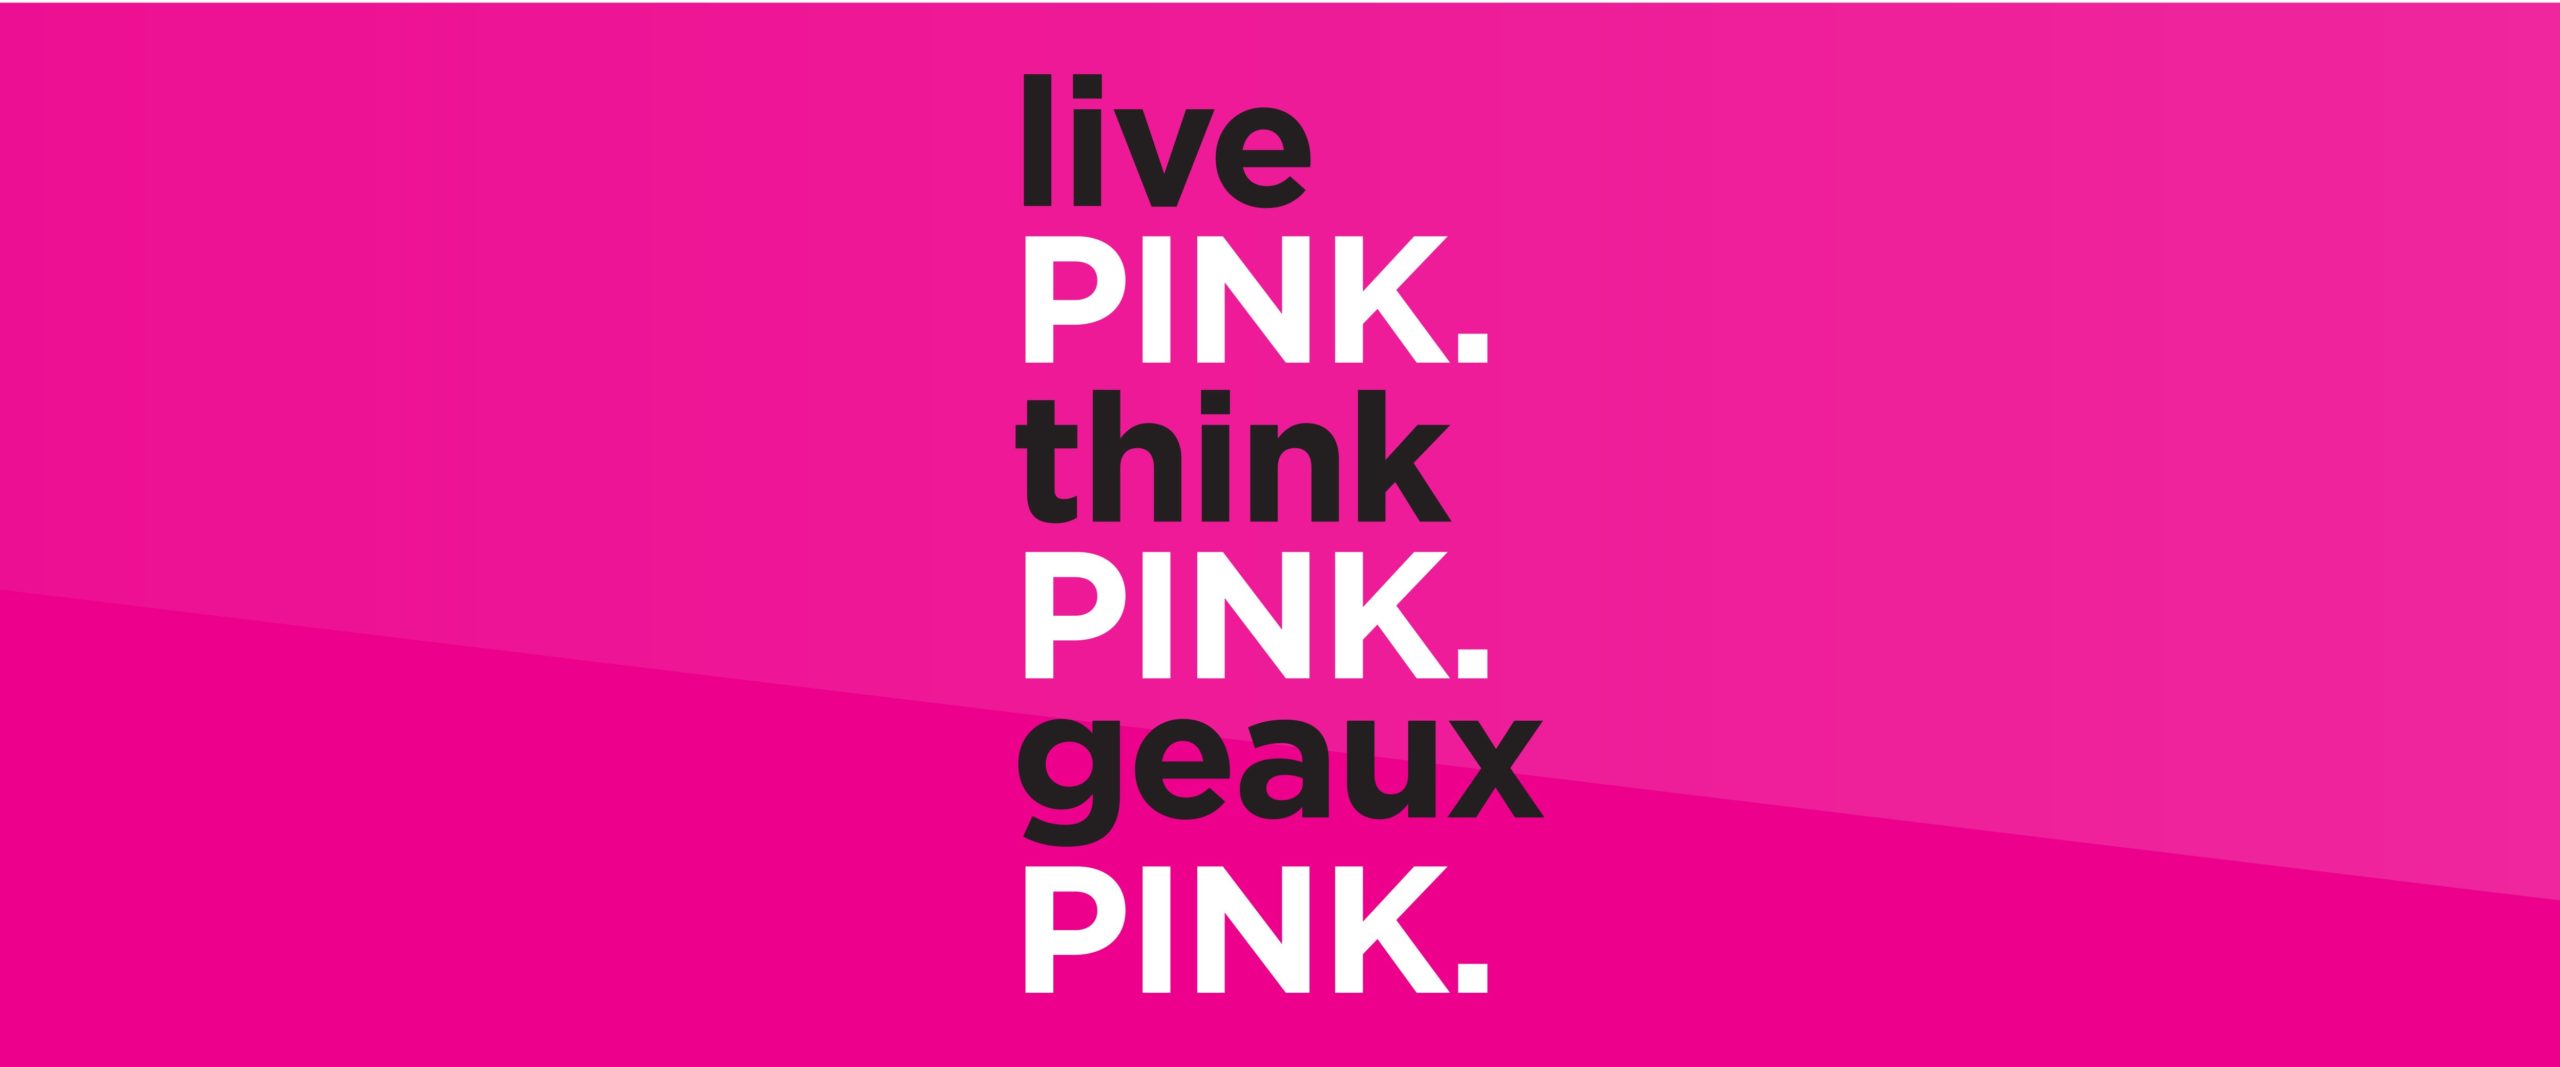 Live Pink. Think Pink. Geaux Pink.